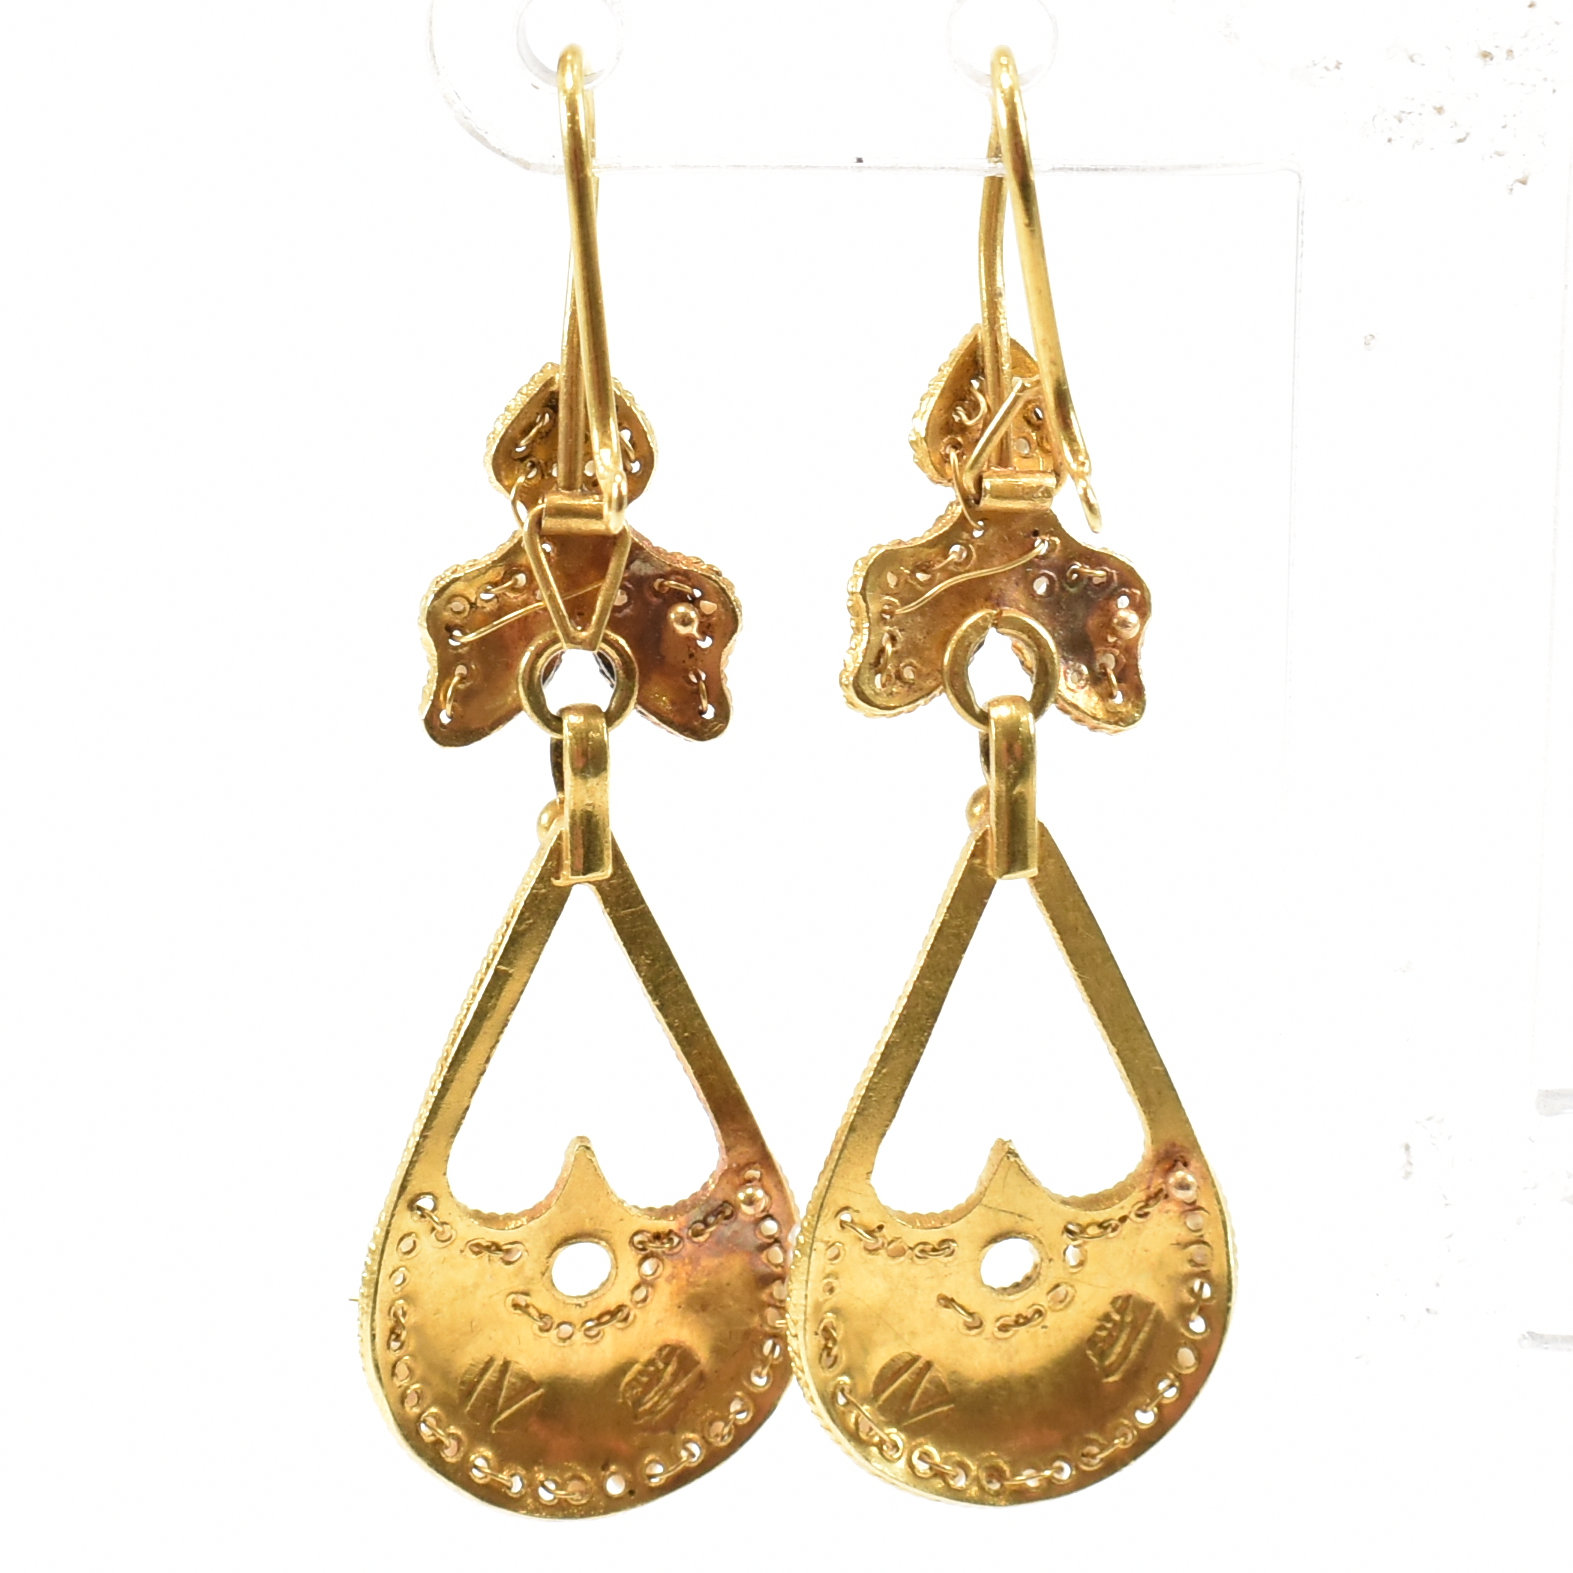 PAIR OF FRENCH 18CT GOLD & SEED PEARL PENDANT EARRINGS - Image 9 of 9